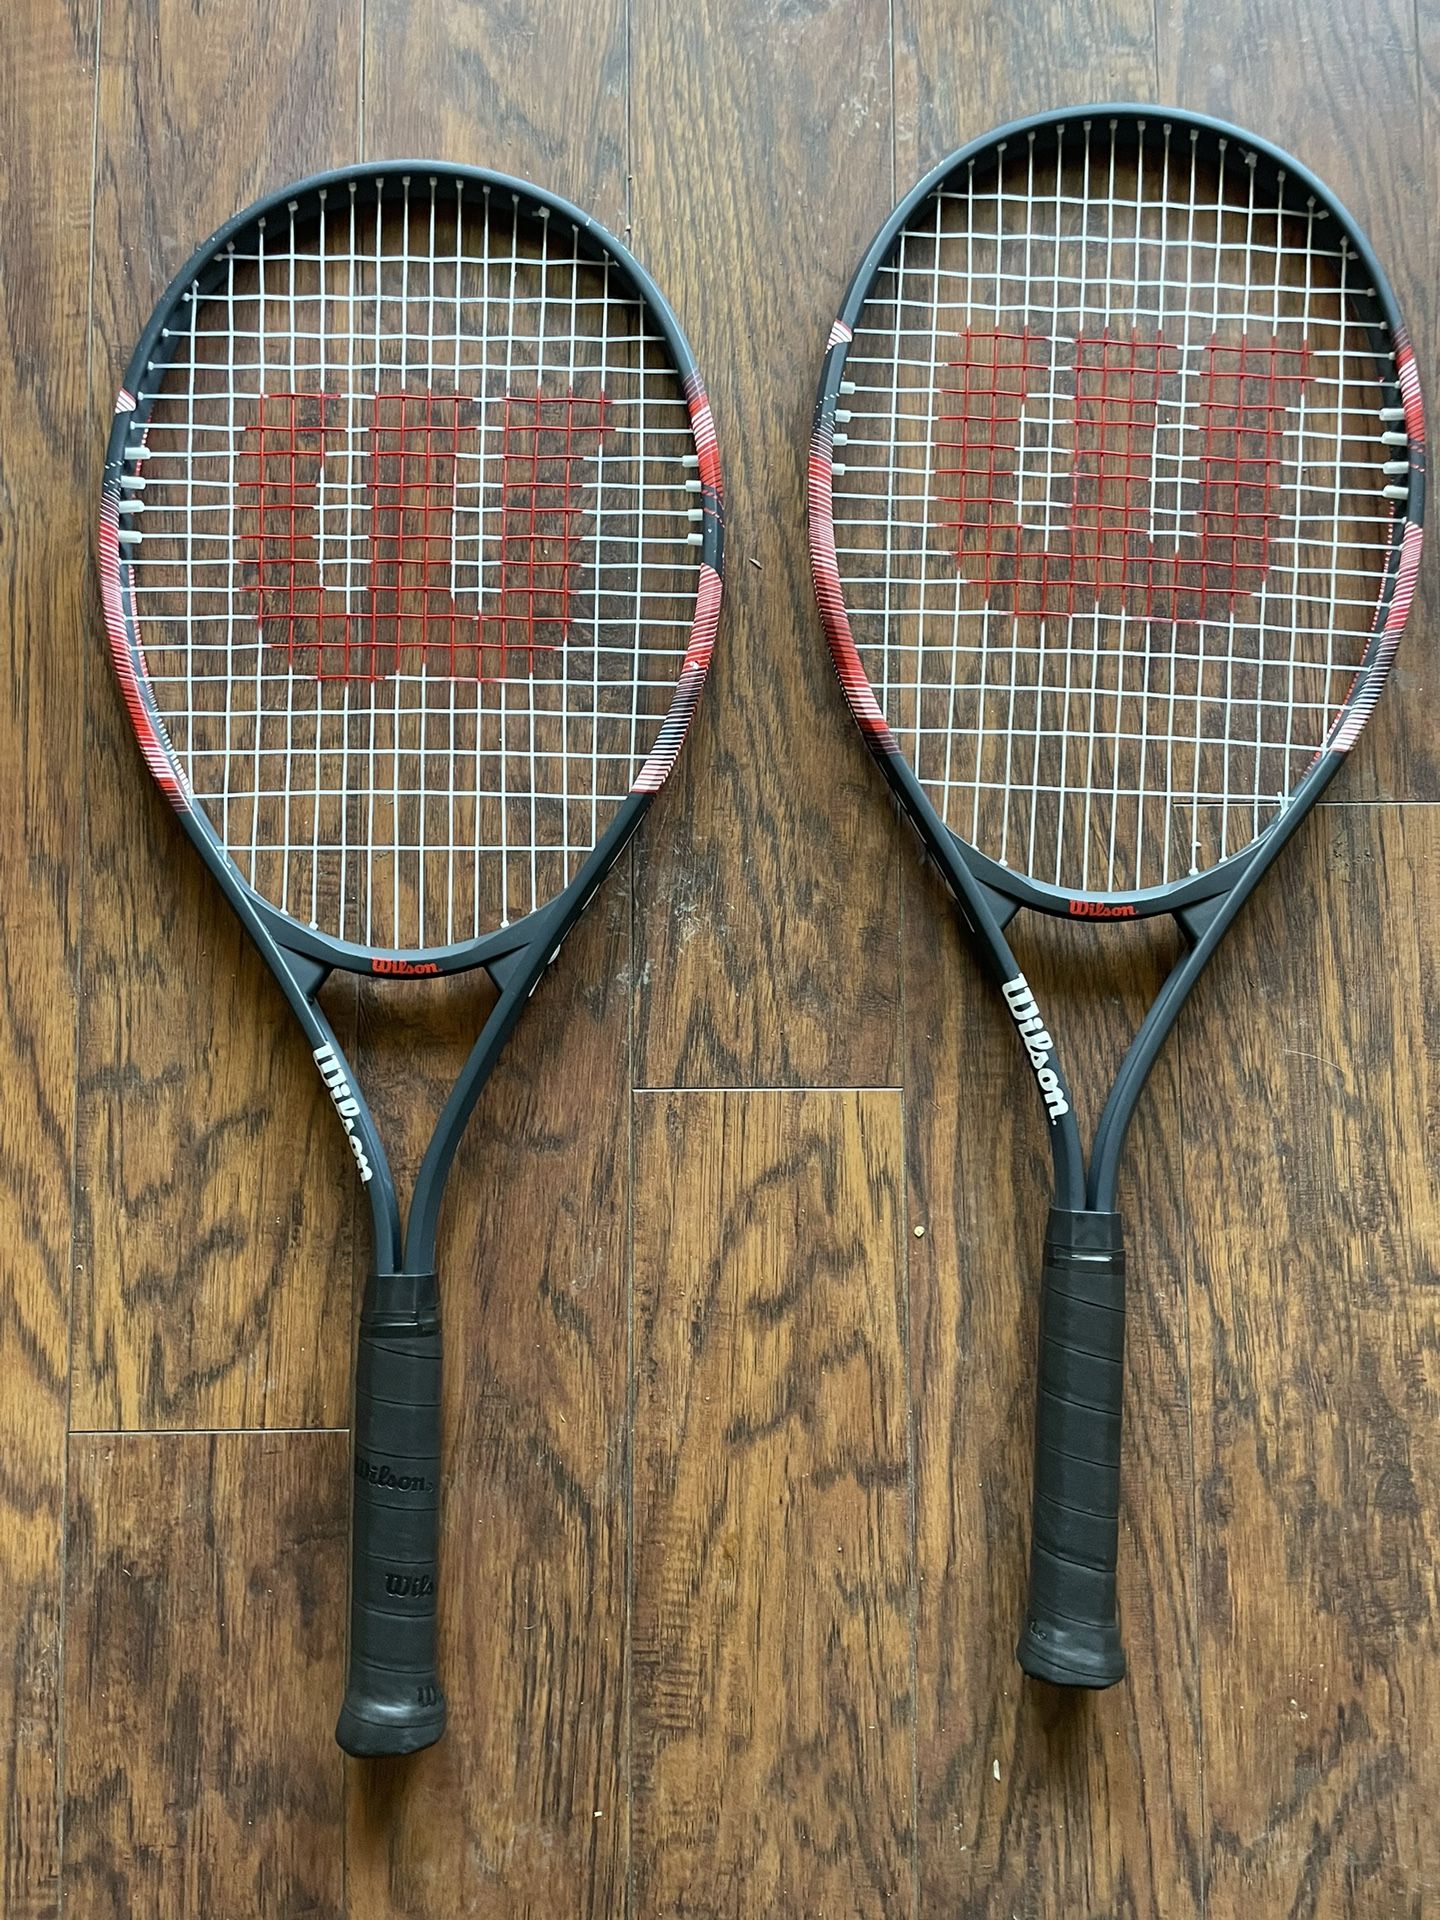 40 For Both Tennis Rackets